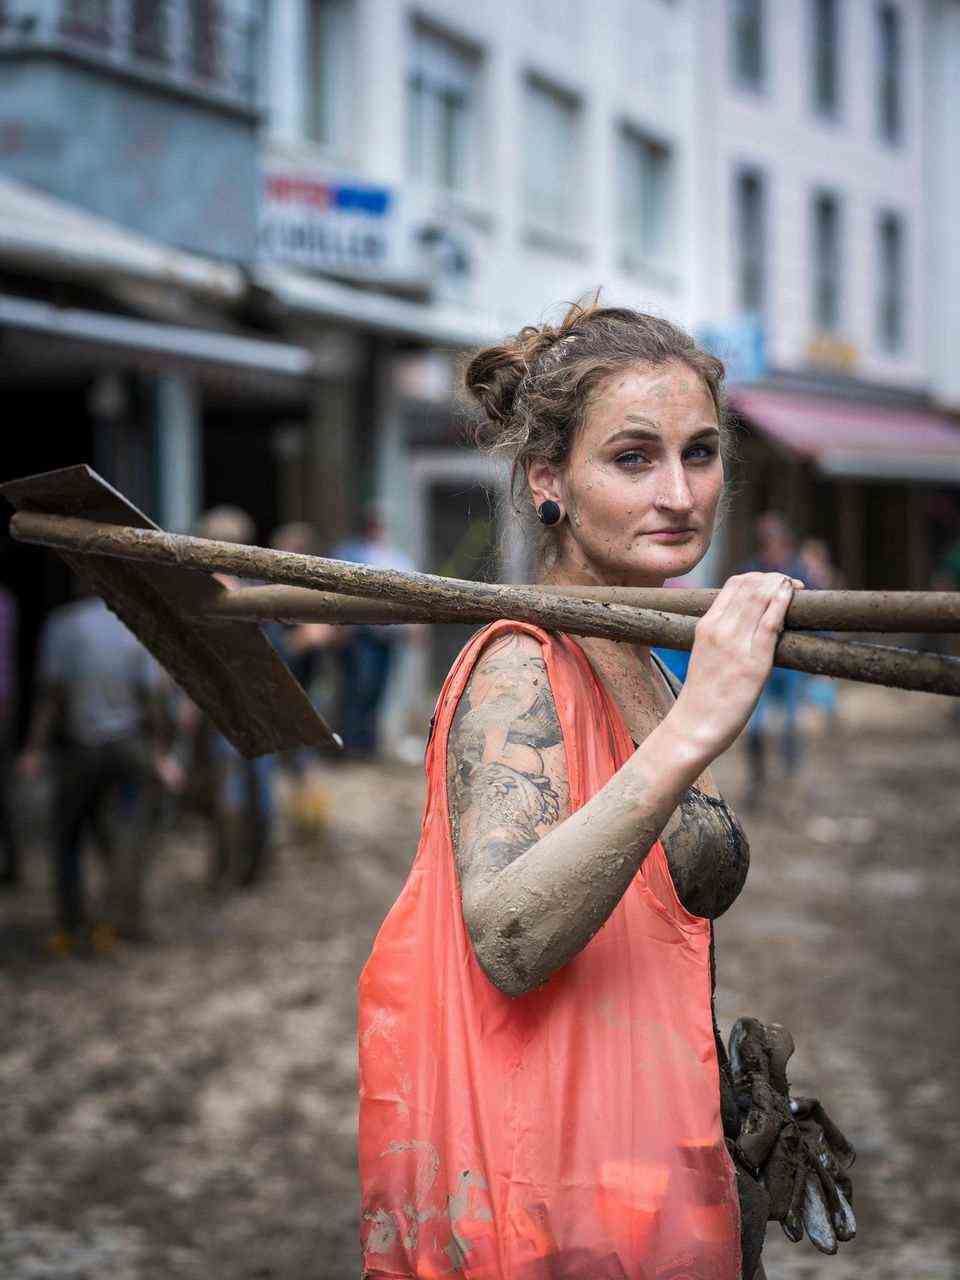 Jennifer Lambertz, 27, student from Bad Breisig Locations: Sinzig, Bad Neuenahr-Ahrweiler The young woman quickly got used to the smell of mud and engine oil.  Not the pictures of destruction.  Immediately after the flood disaster, she teamed up with neighbors, acquaintances and friends.  Together, often with 20 women and men, they cleared the flooded houses and cellars in Sinzig and Ahrweiler.  They took out possessions that were barely recognizable in the dirt: books and files, photo albums, cupboards, heavy stones, cuddly toys.  Jennifer Lambertz tried not to think about all the fates, the stories behind the objects that she threw on the rubble.  Even so, she was close to tears at times.  Her feet are in rubber boots for many days.  She had a backache from shoveling - like other helpers. "Lots of hands, quick end" - the saying had become the motto of the mission.  Jennifer Lambertz said: "The gratitude of the people is indescribable."